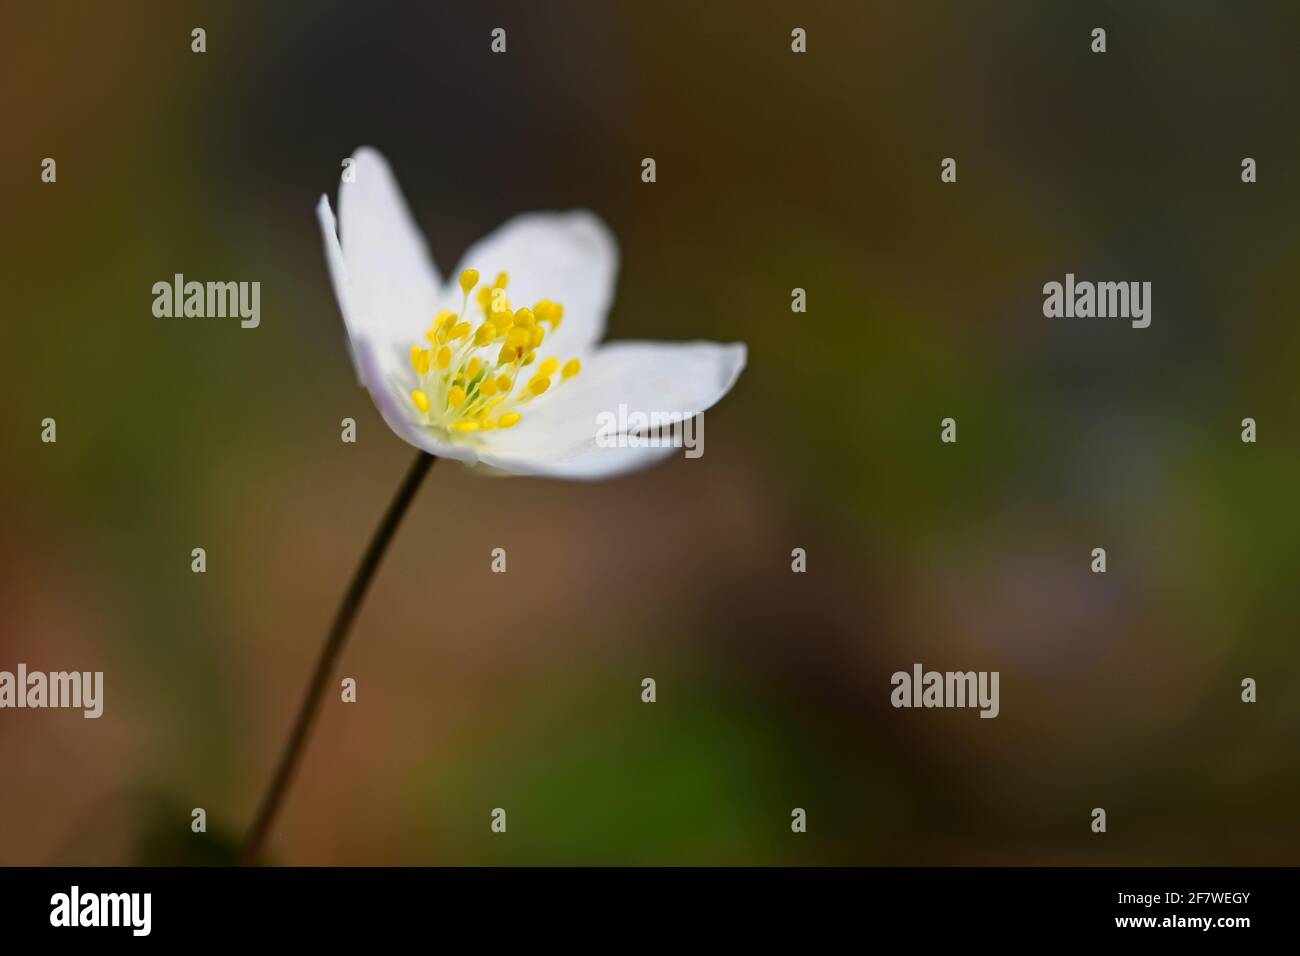 Spring white flowers in the grass Anemone (Isopyrum thalictroides) Stock Photo